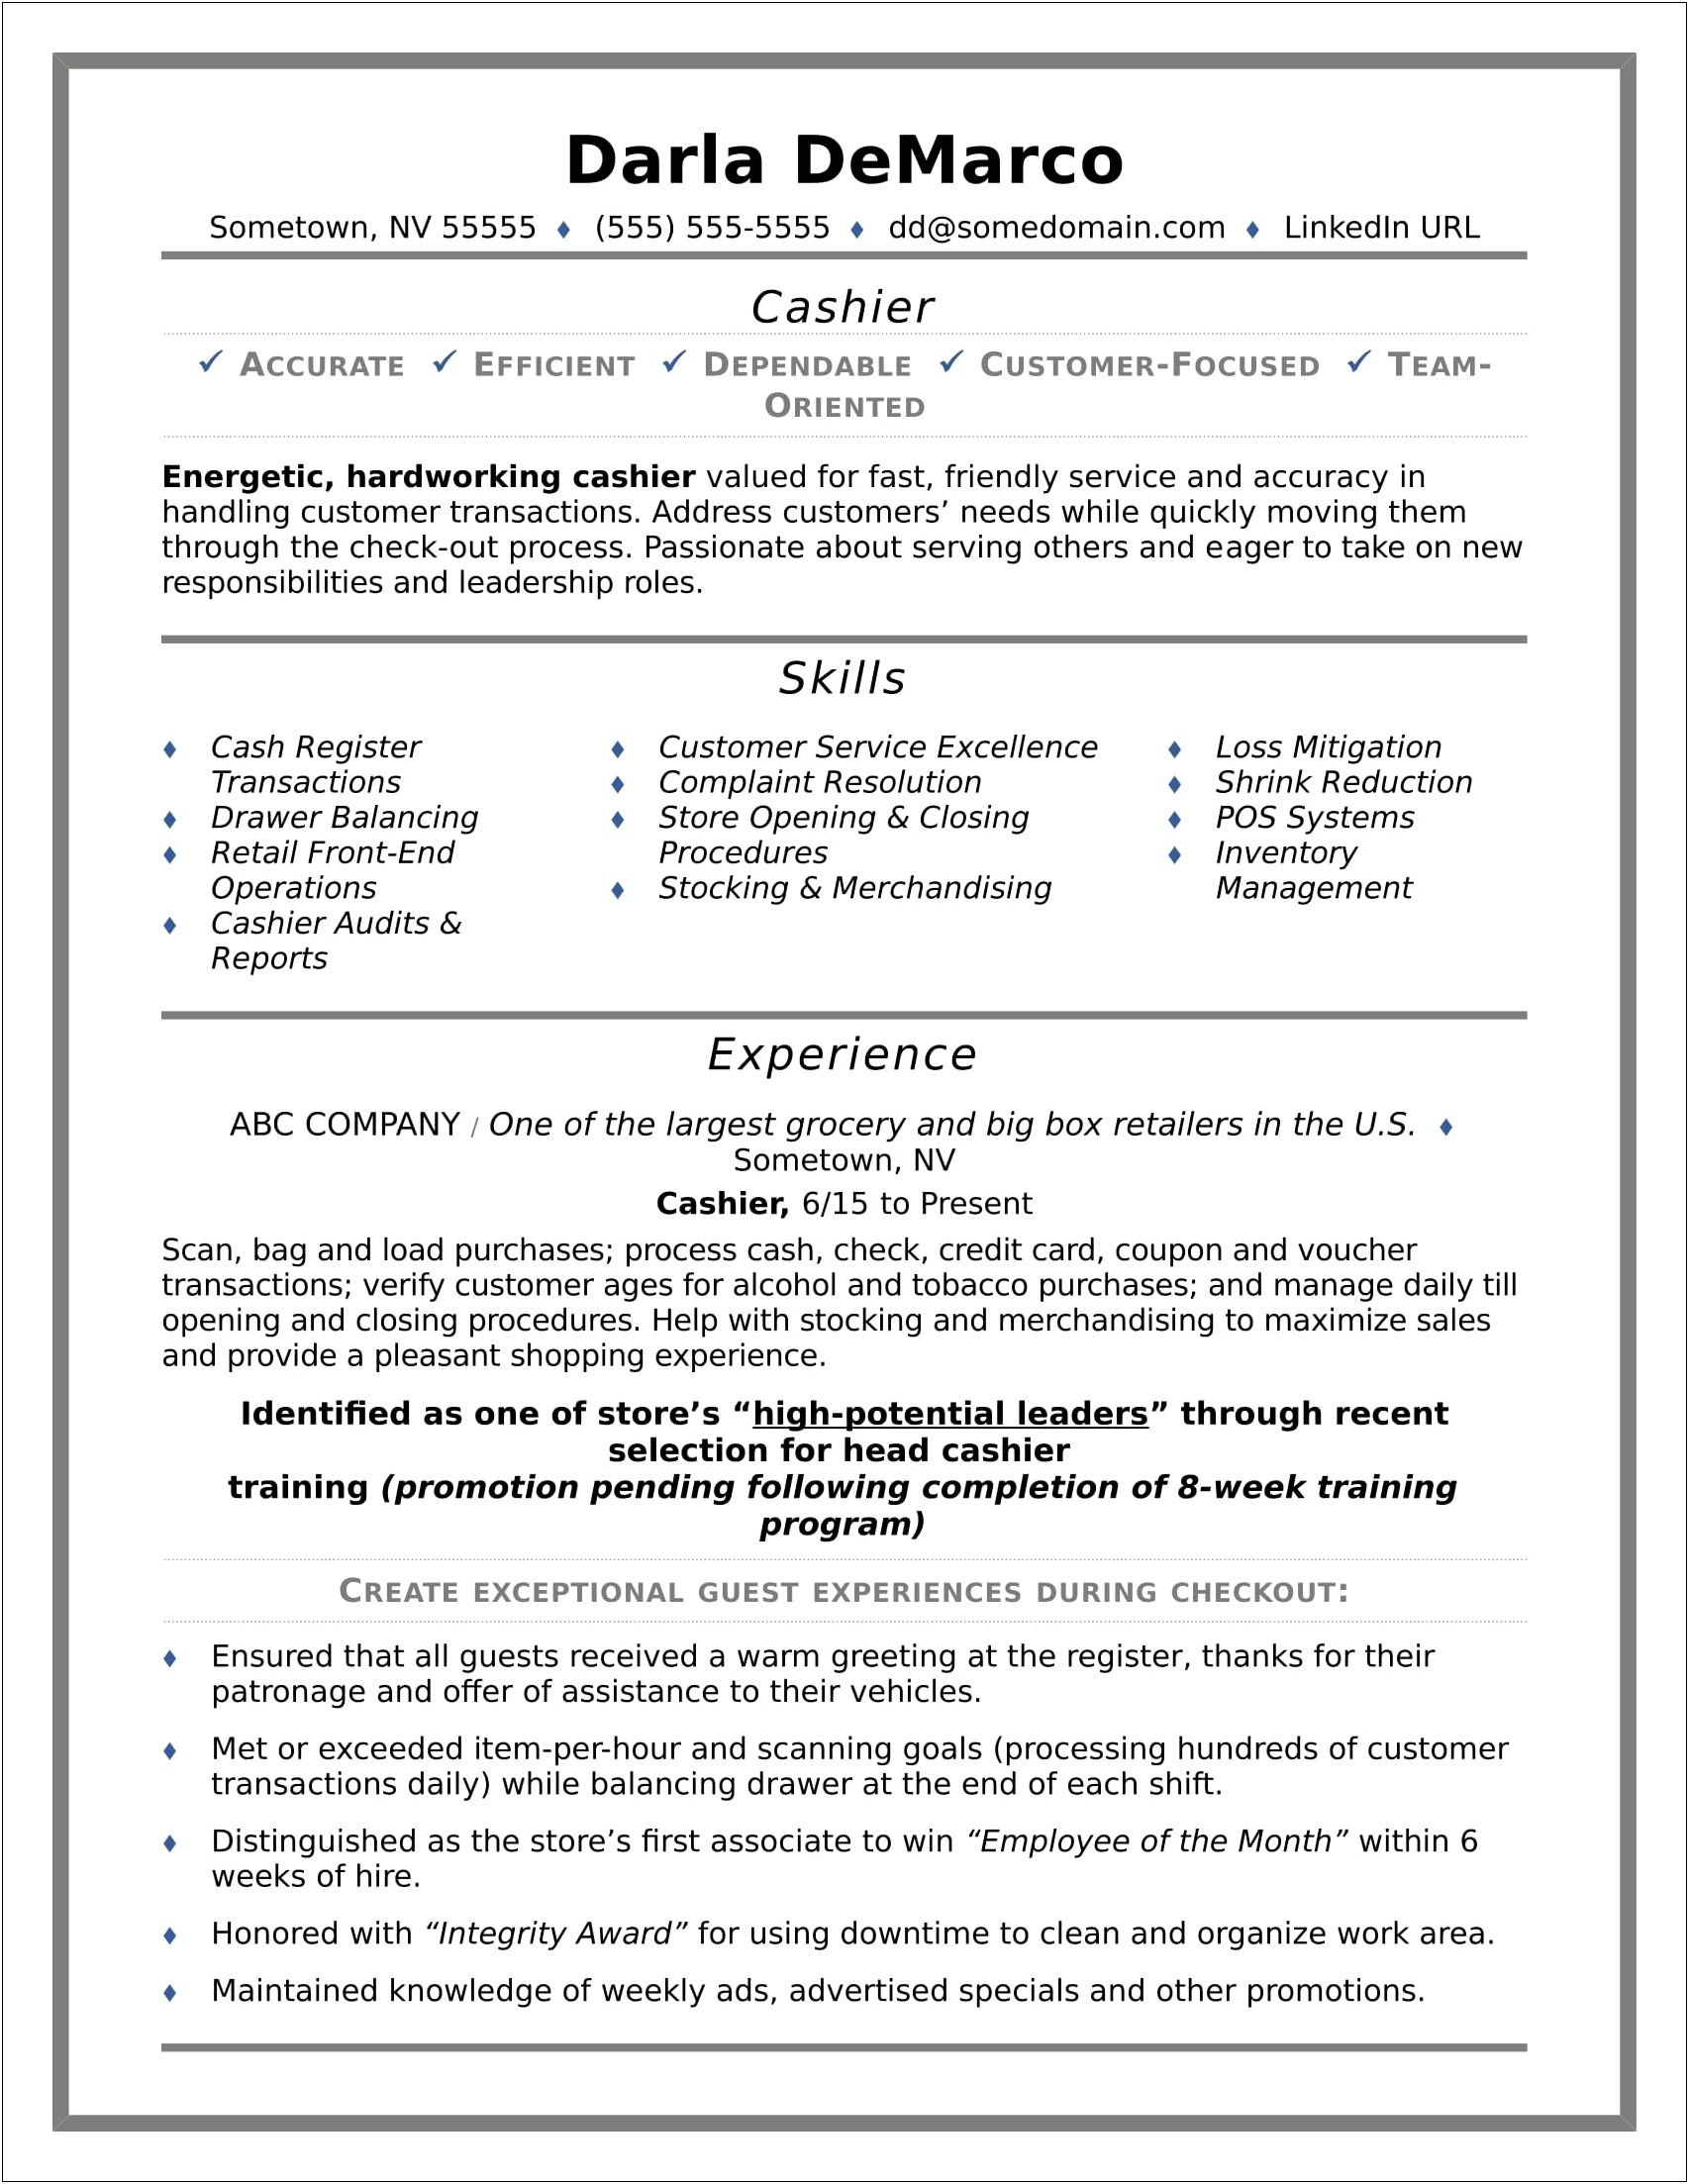 Does Cashier Look Good On Resume